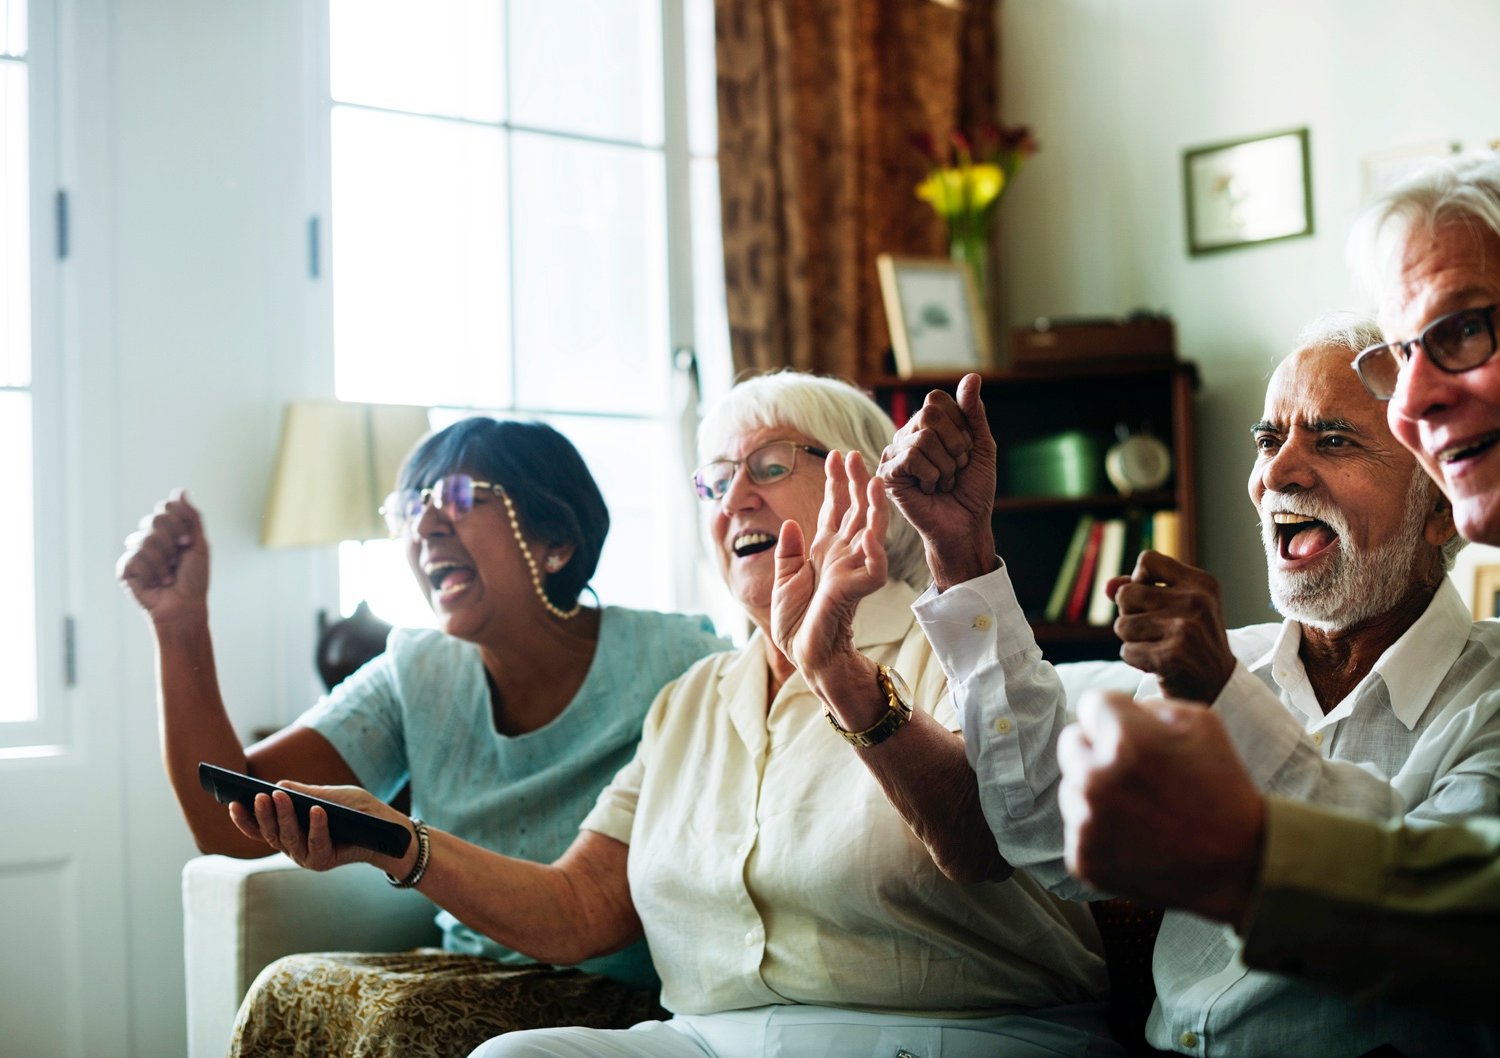 Senior people watching television together